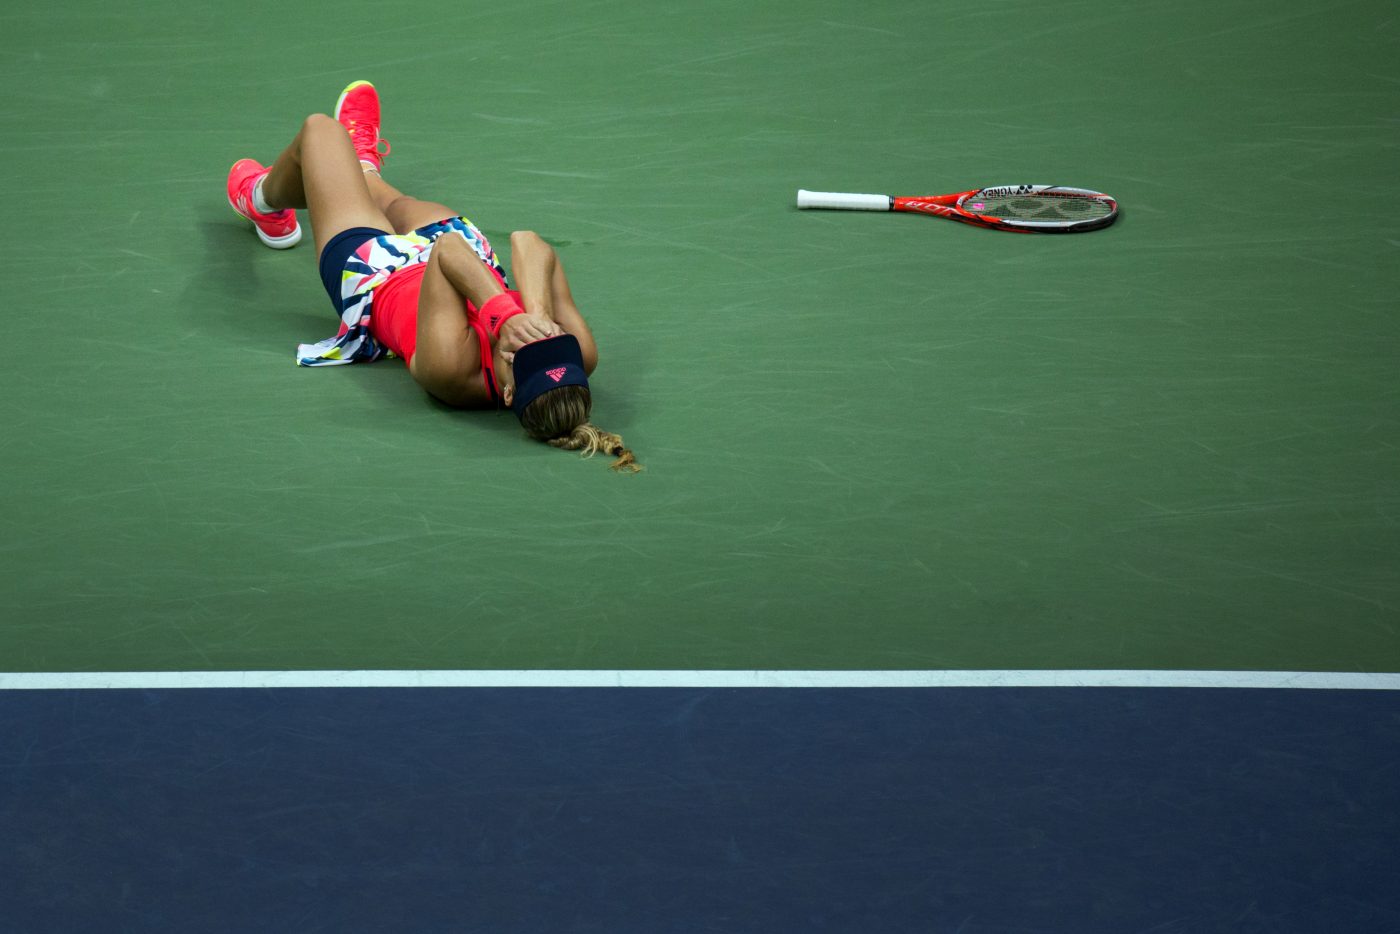 Angelique Kerber falls to the court after defeating Karolina Pliskova for the women's singles championship at the U.S. Open in Flushing on Sept. 10, 2016.